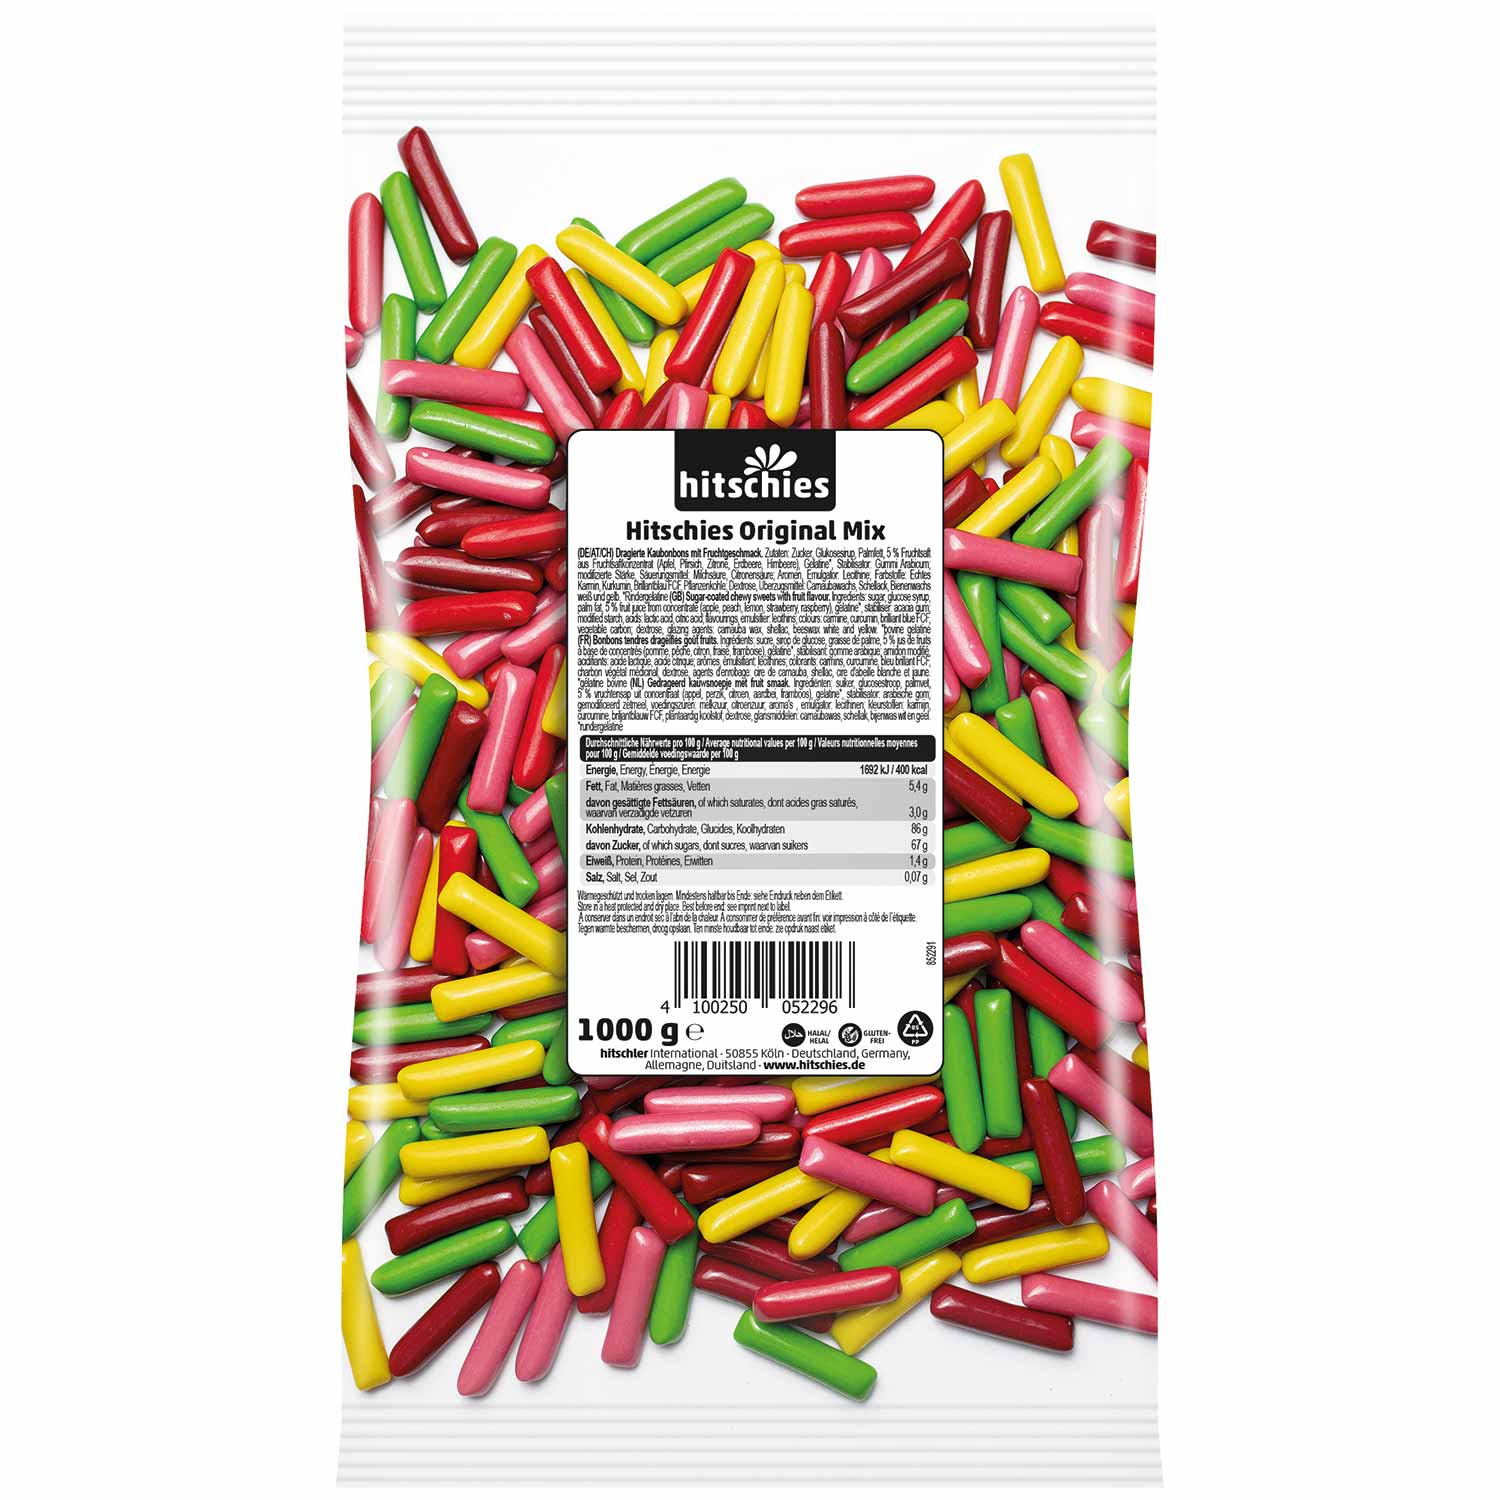 hitschies Fruity Chewy Candies Original Mix 1kg / 2.2lbs